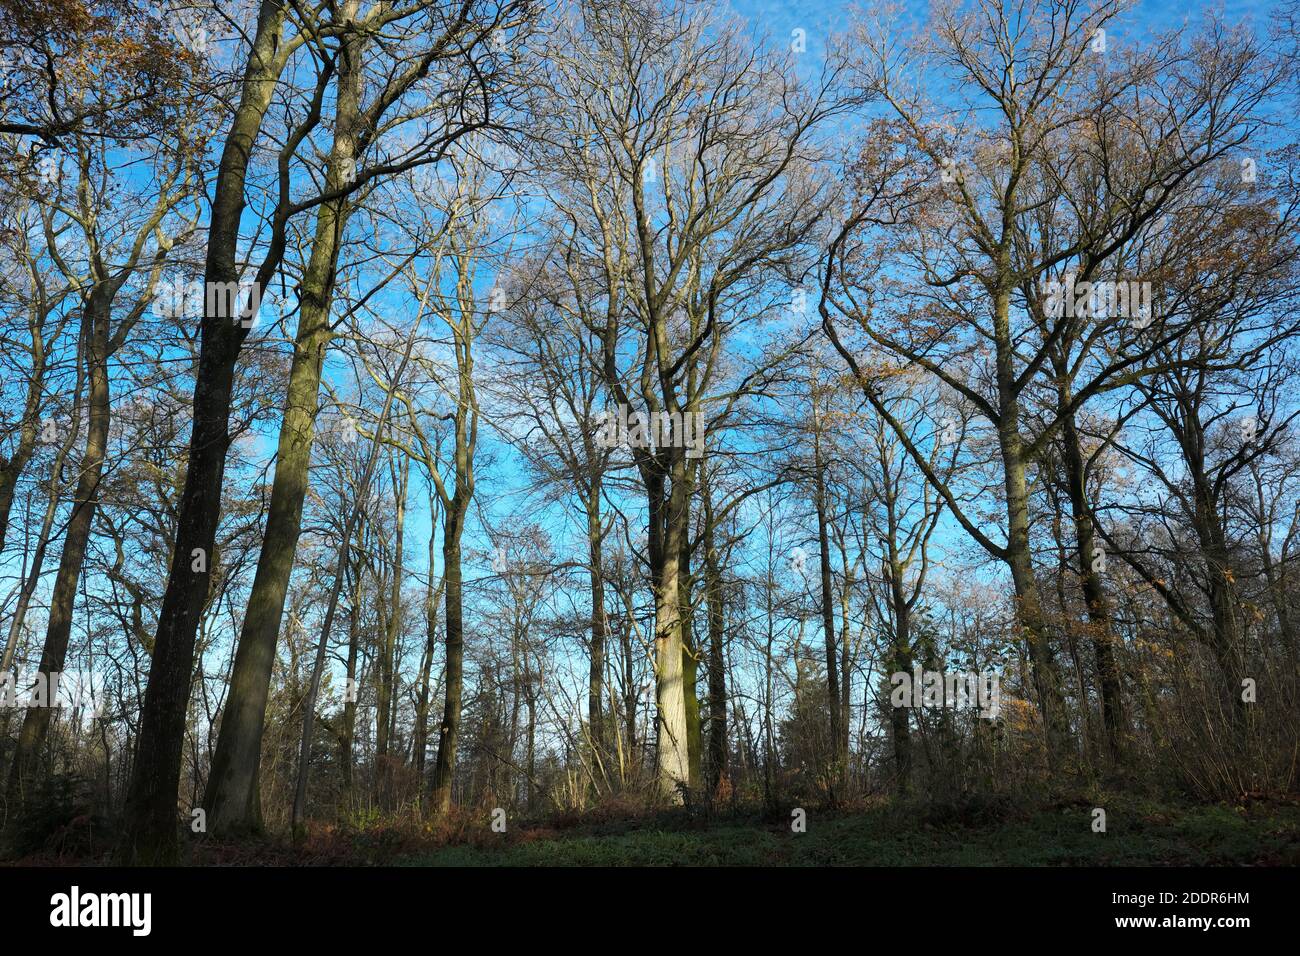 Aconbury Wood in Herefordshire UK - Nov 2020 hillside woods owned by the Duchy of Cornwall open to the public.near the village of Kingsthorne. Stock Photo